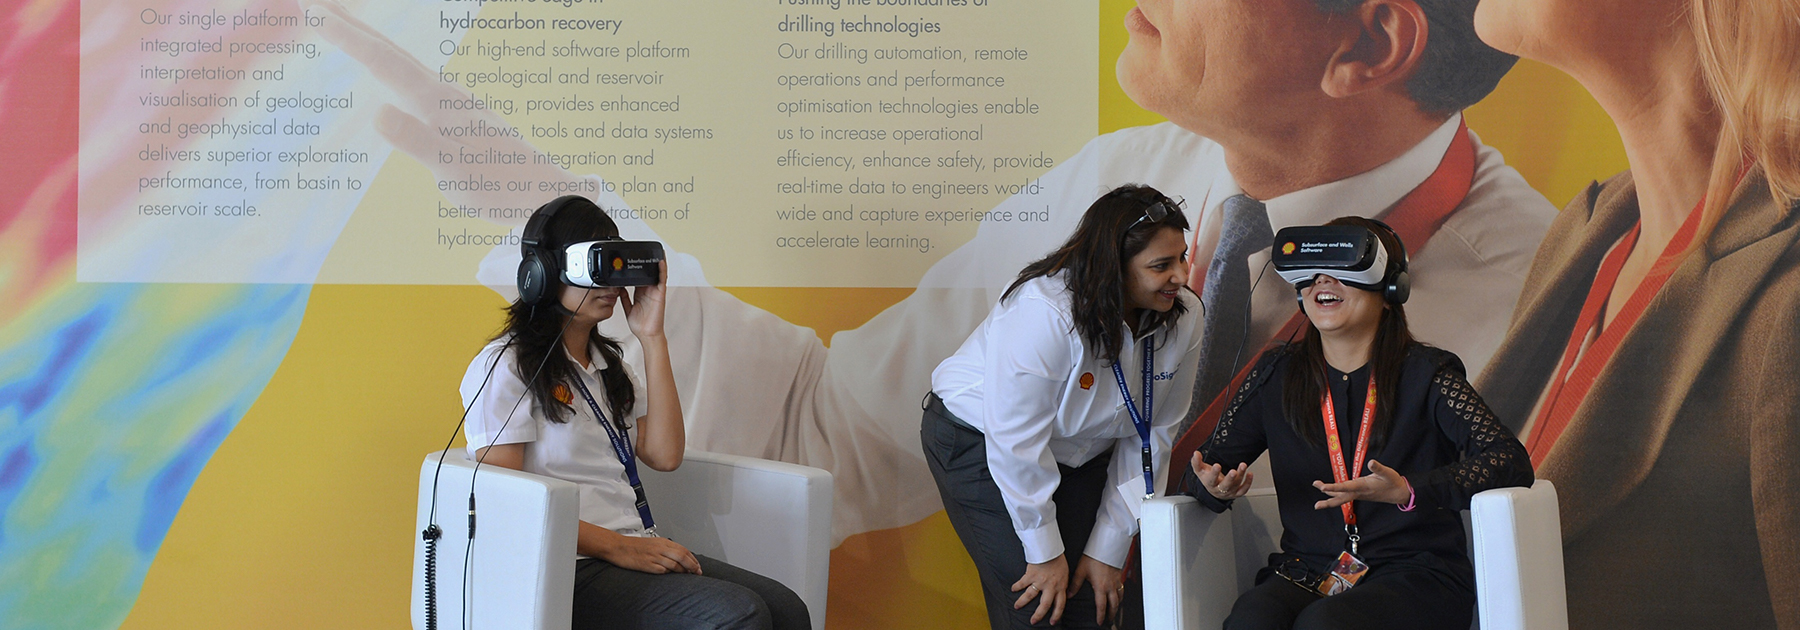 An employee of Shell company (C) helps visitors take a tour of Shell refineries using Virtual Reality goggles in Bangalore. (MANJUNATH KIRAN/AFP/Getty Images)